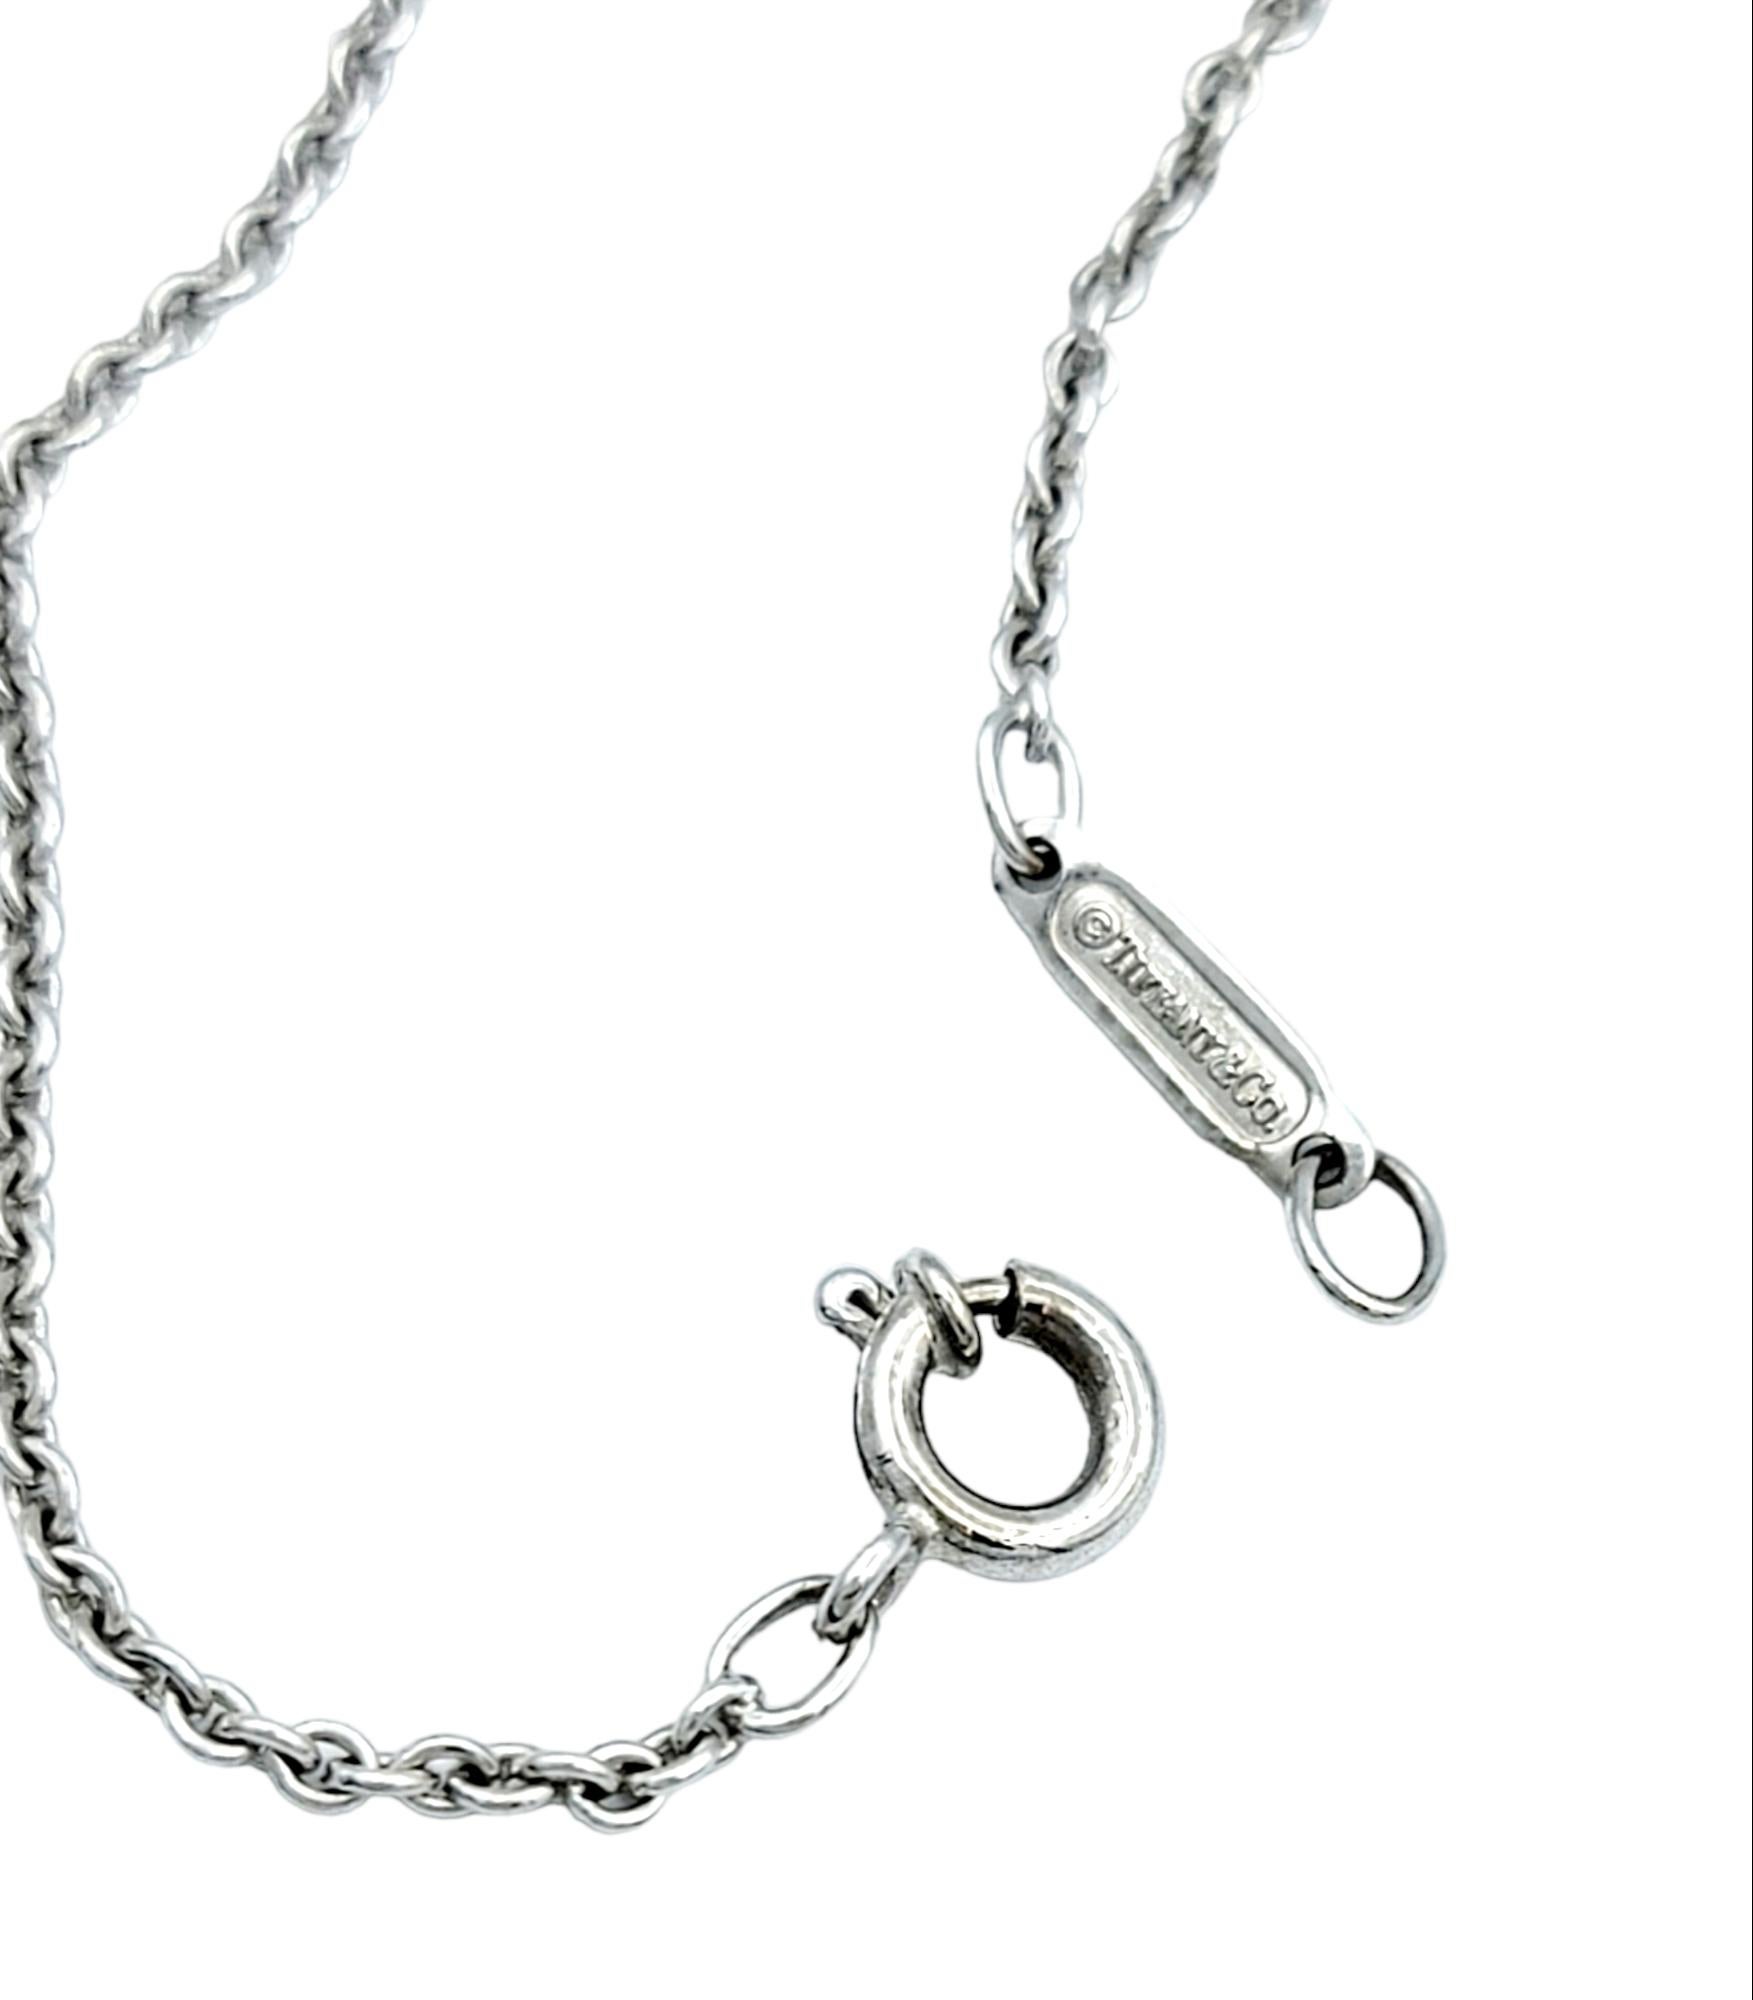 Contemporary Tiffany & Co. 1837 Double Bar Pendant Necklace with Diamonds in 18K White Gold For Sale